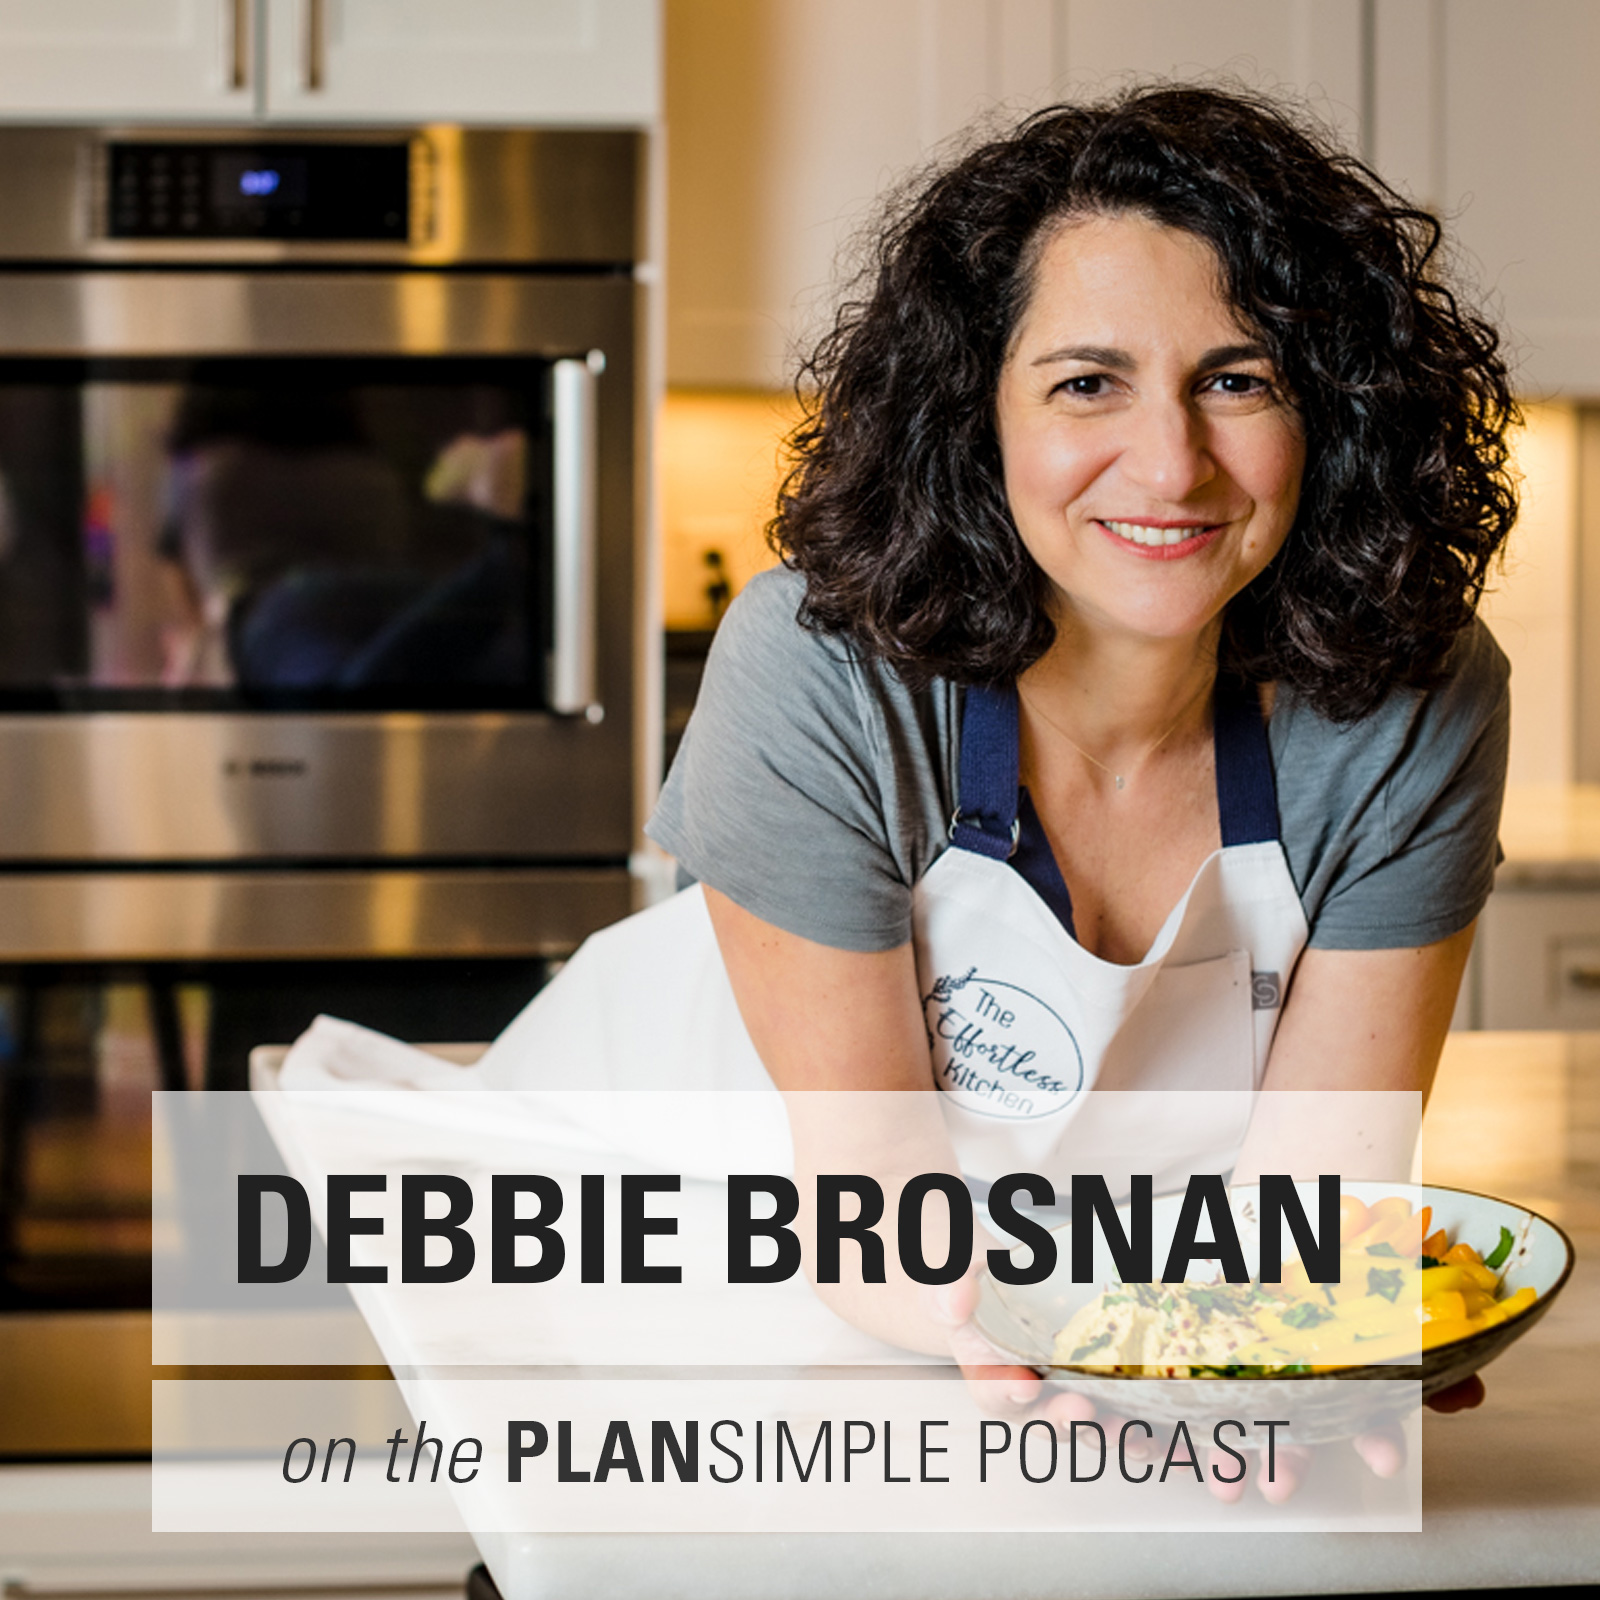 Learn To Cook With Debbie Brosnan